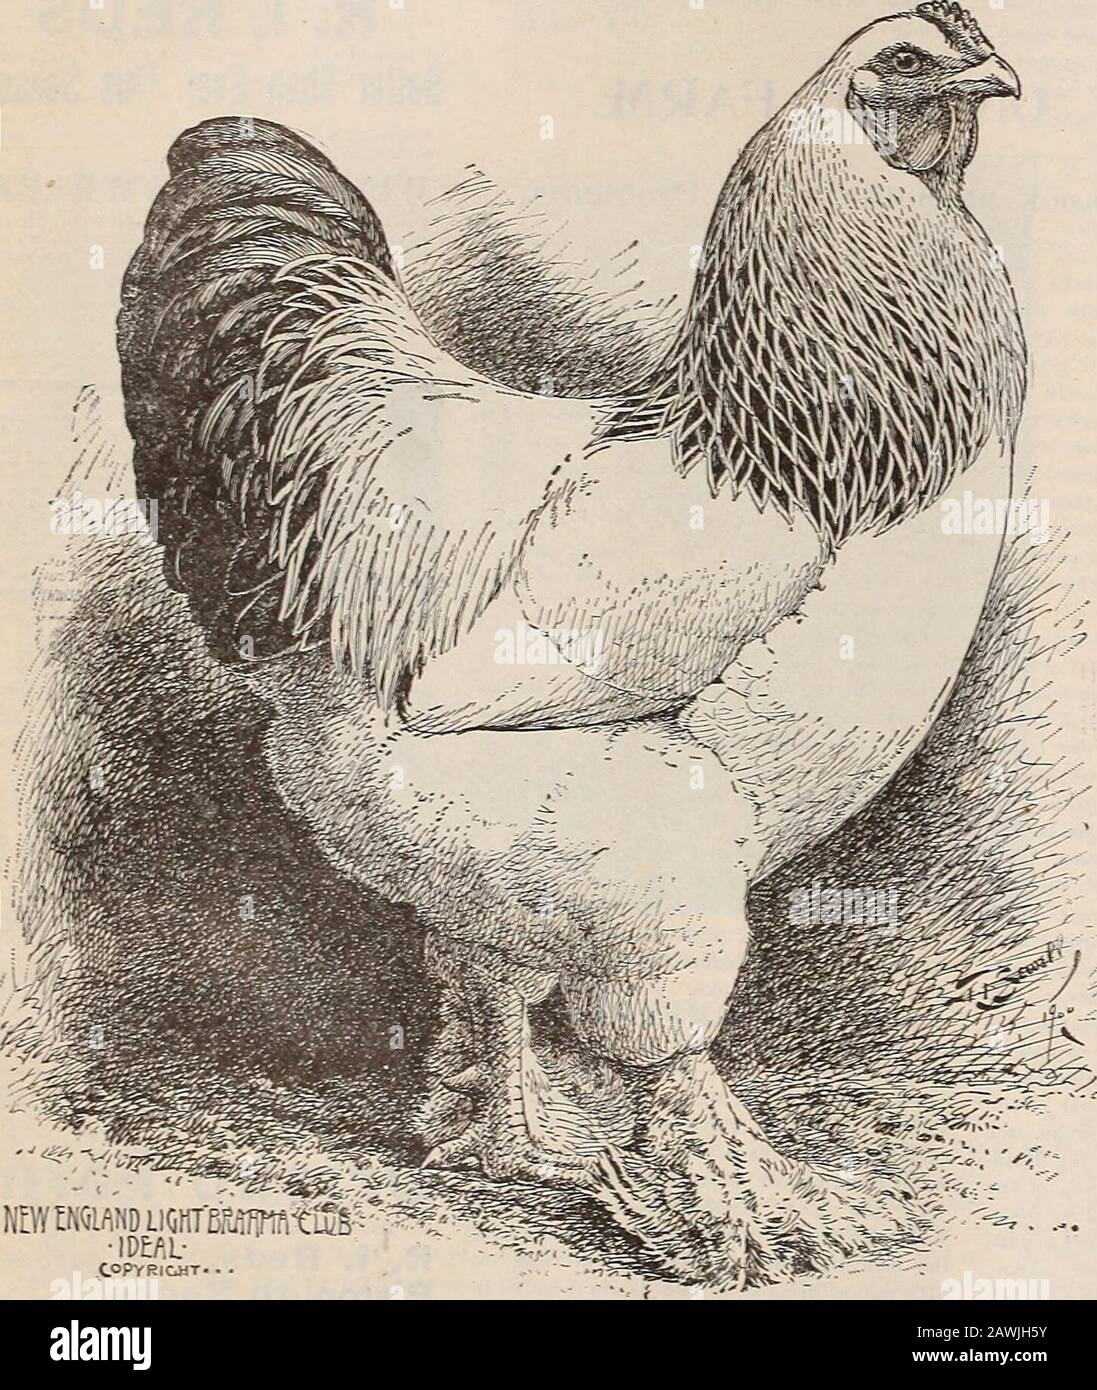 The Farm-poultry . refore,should not select with reference to relative)jopularity, unless, indeed, he intends to breedfor exhibition as well as for use. While recognized thoroughbred fowls haveso far been alone noticed, the value of cross-bred fowls for practical purposes should notbe forgotten. First crosses of thoroughbredfowls are often quite as protitable as, if noteven more profitable than, the thoroughbredfowls themselves. Bhode Island farmers, whocrossed Rose Combed Brown Leghorn malesupon the so-called Buff Malay females, foundthe cross excellent for eggs and market poul-try: and, with Stock Photo